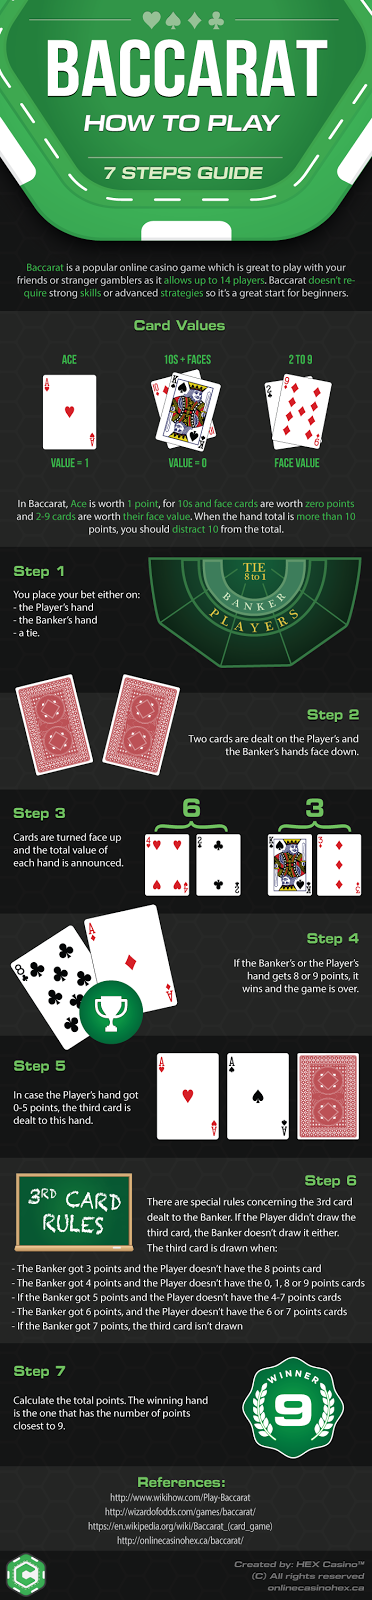 How To play Baccarat - Rules - Infographic